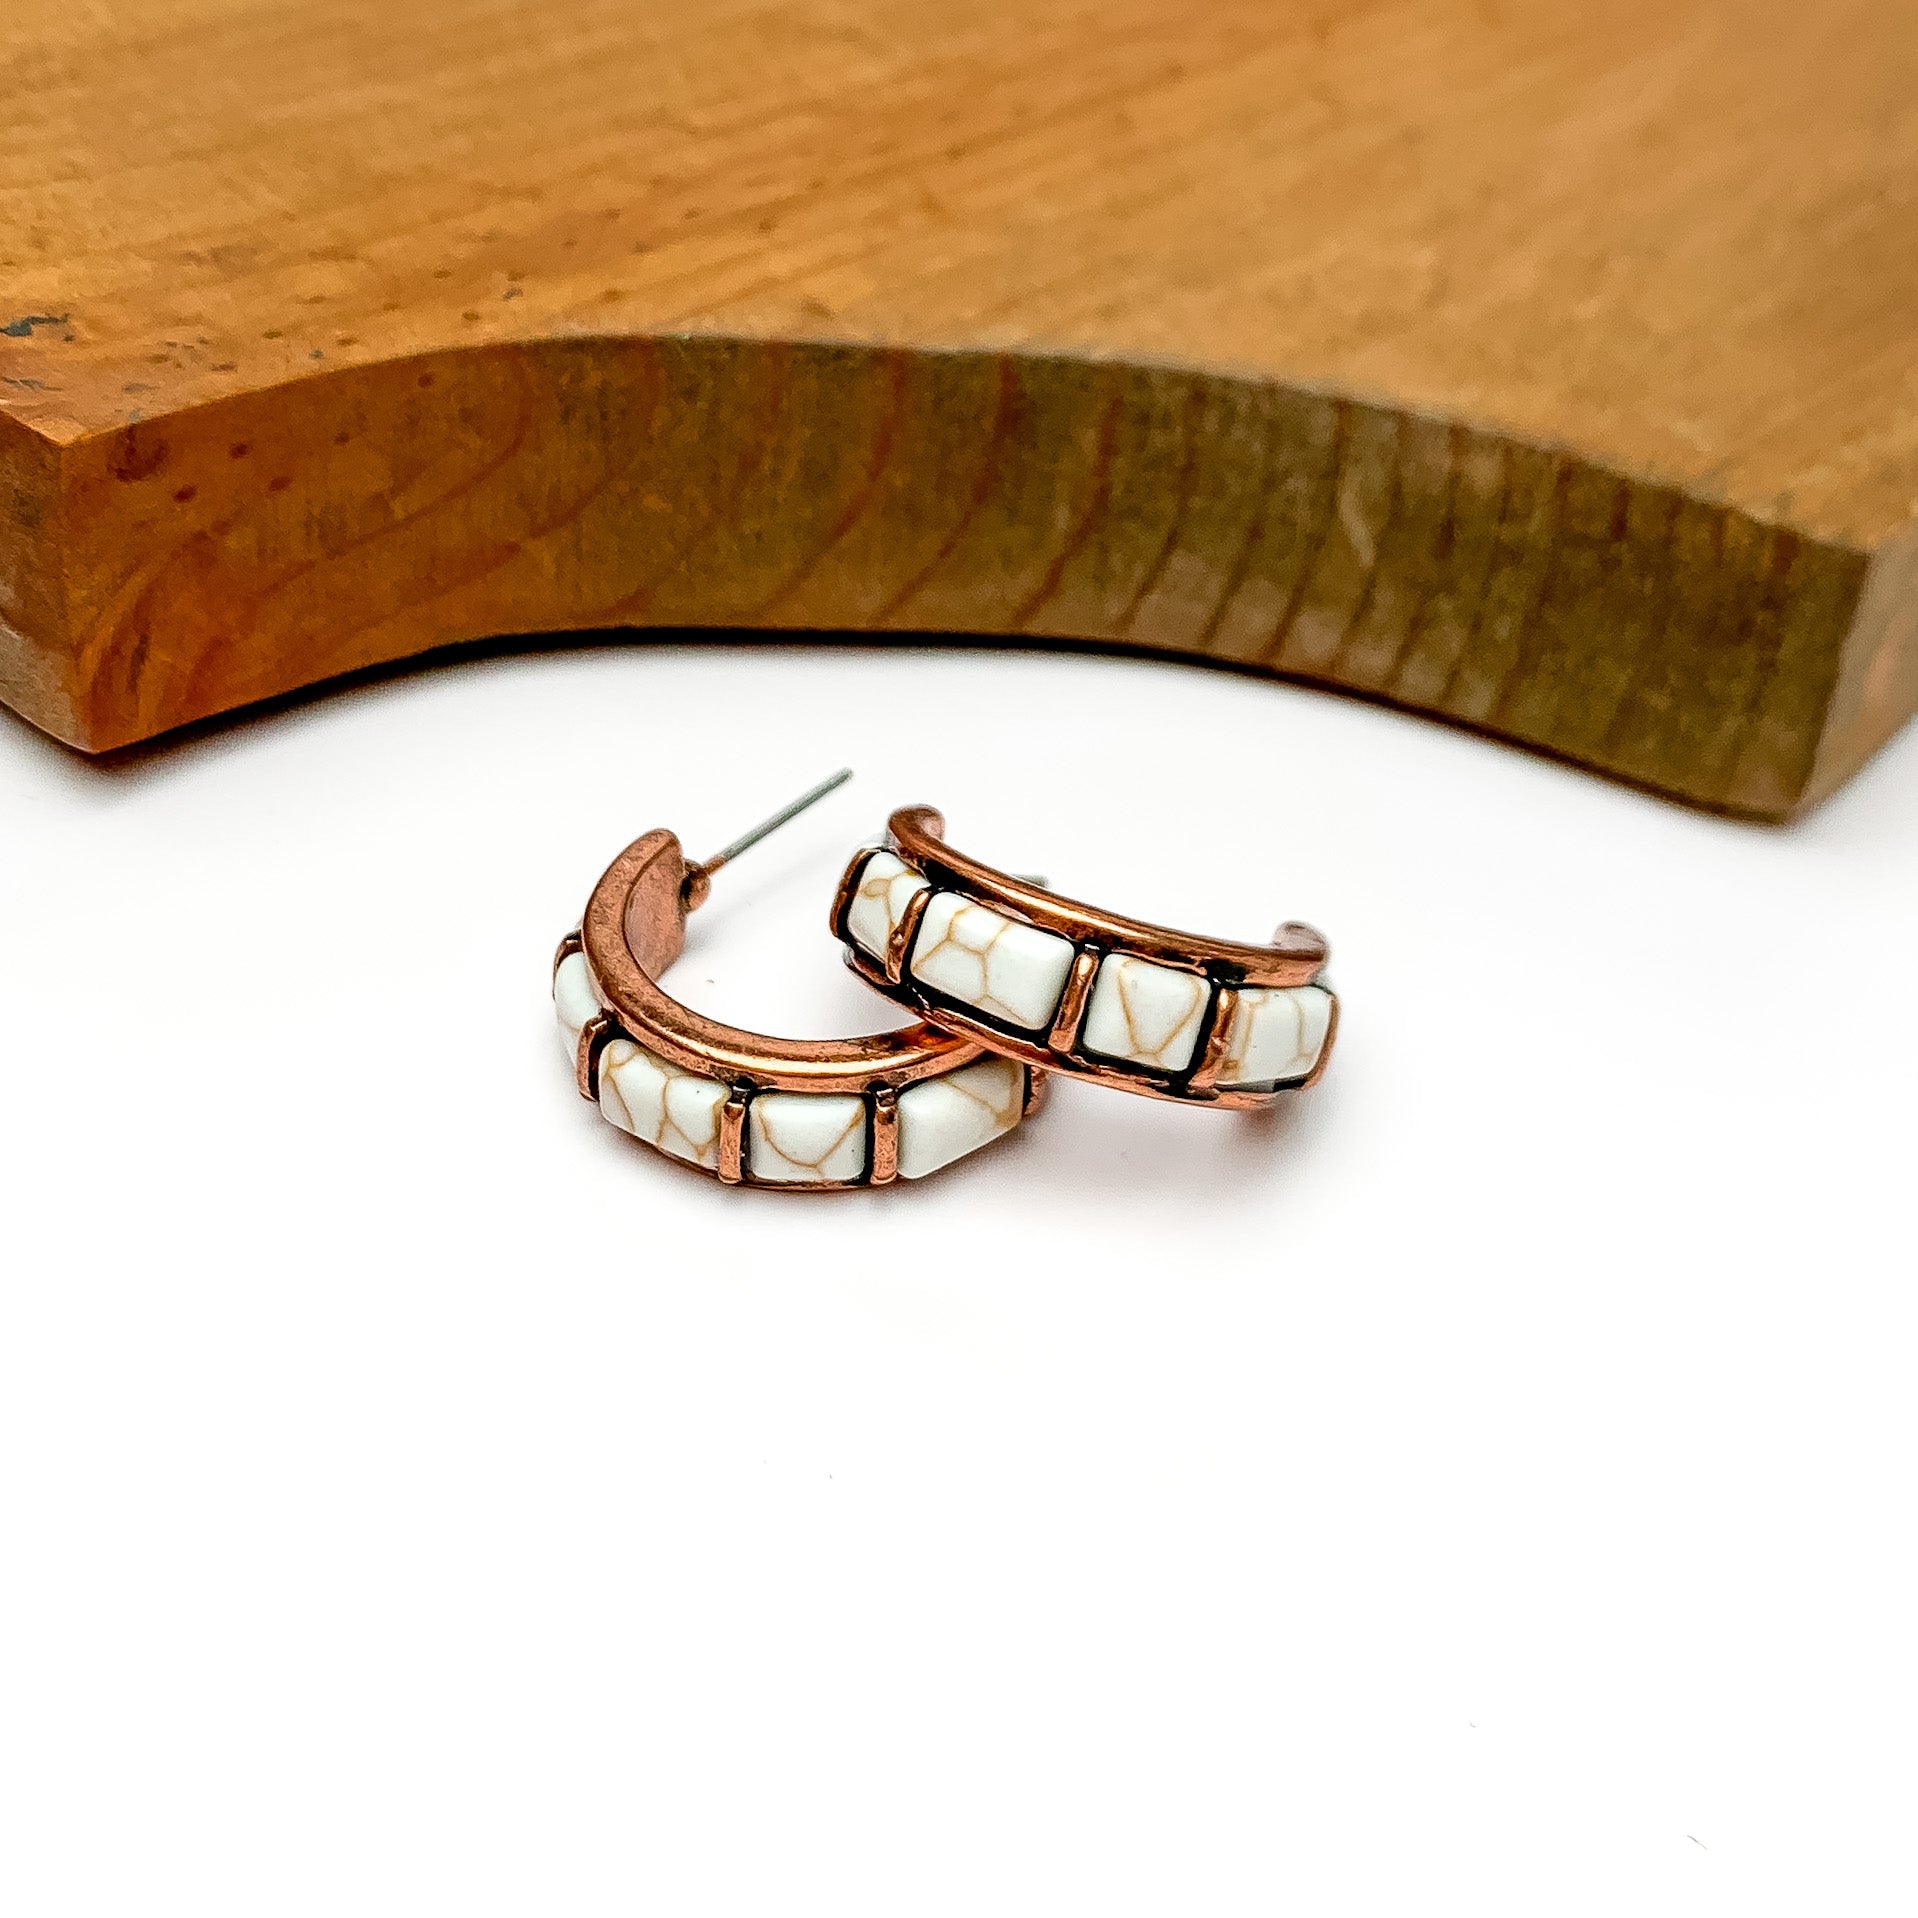 Ivory and copper tone medium hoop earrings. Pictured on a white background with wood at the top.